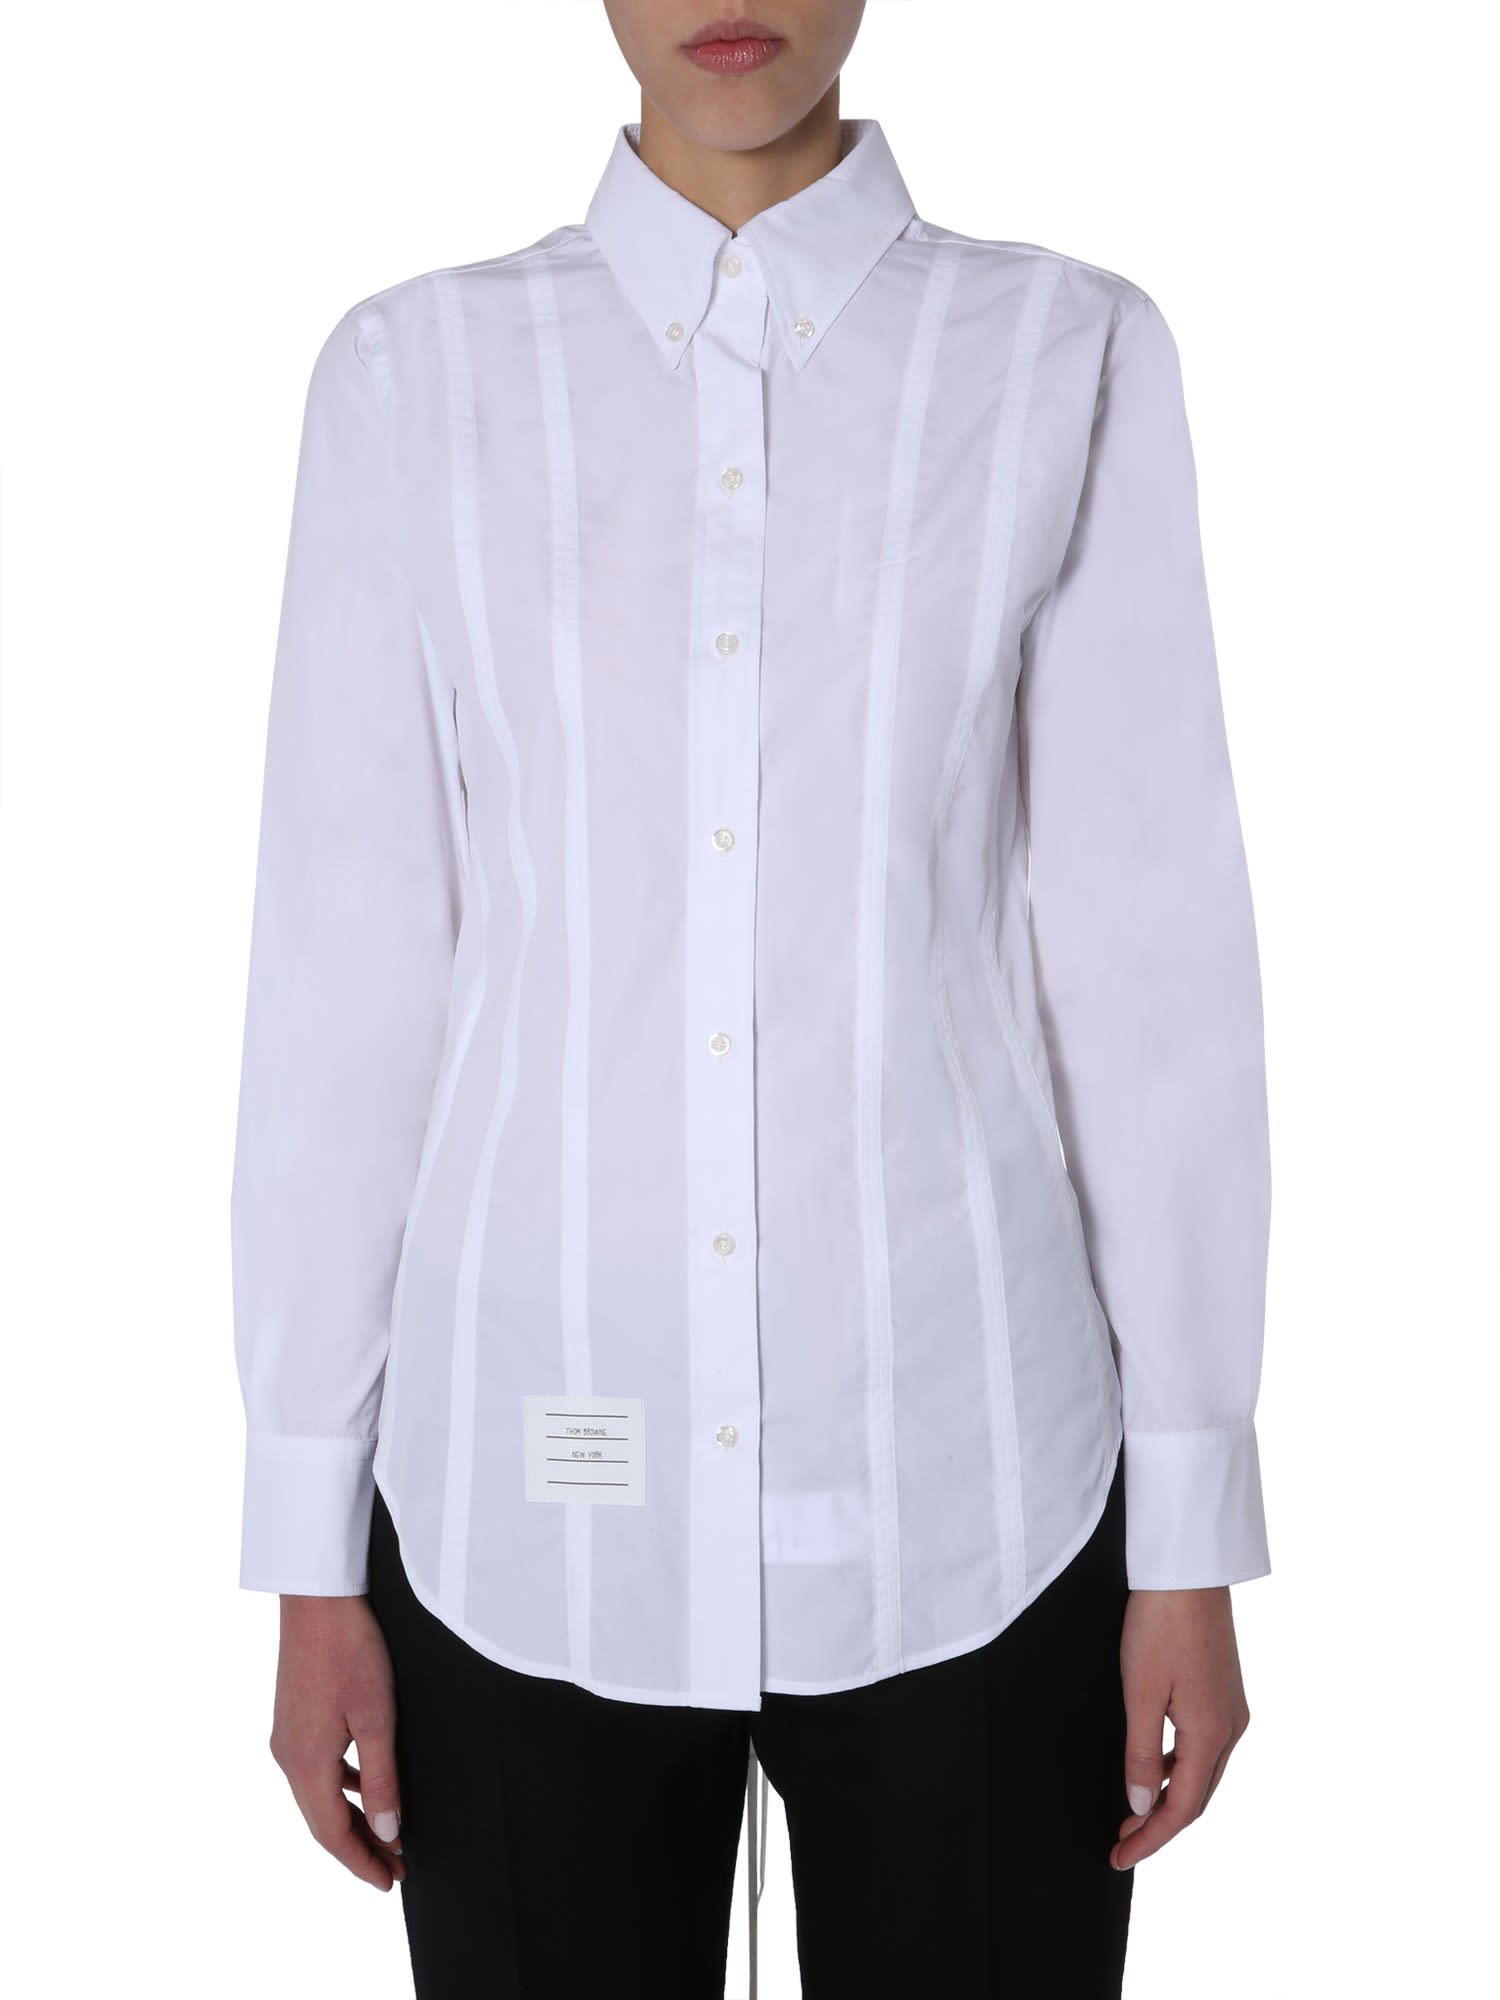 THOM BROWNE SHIRT WITH LACES,FLL052A 03113100